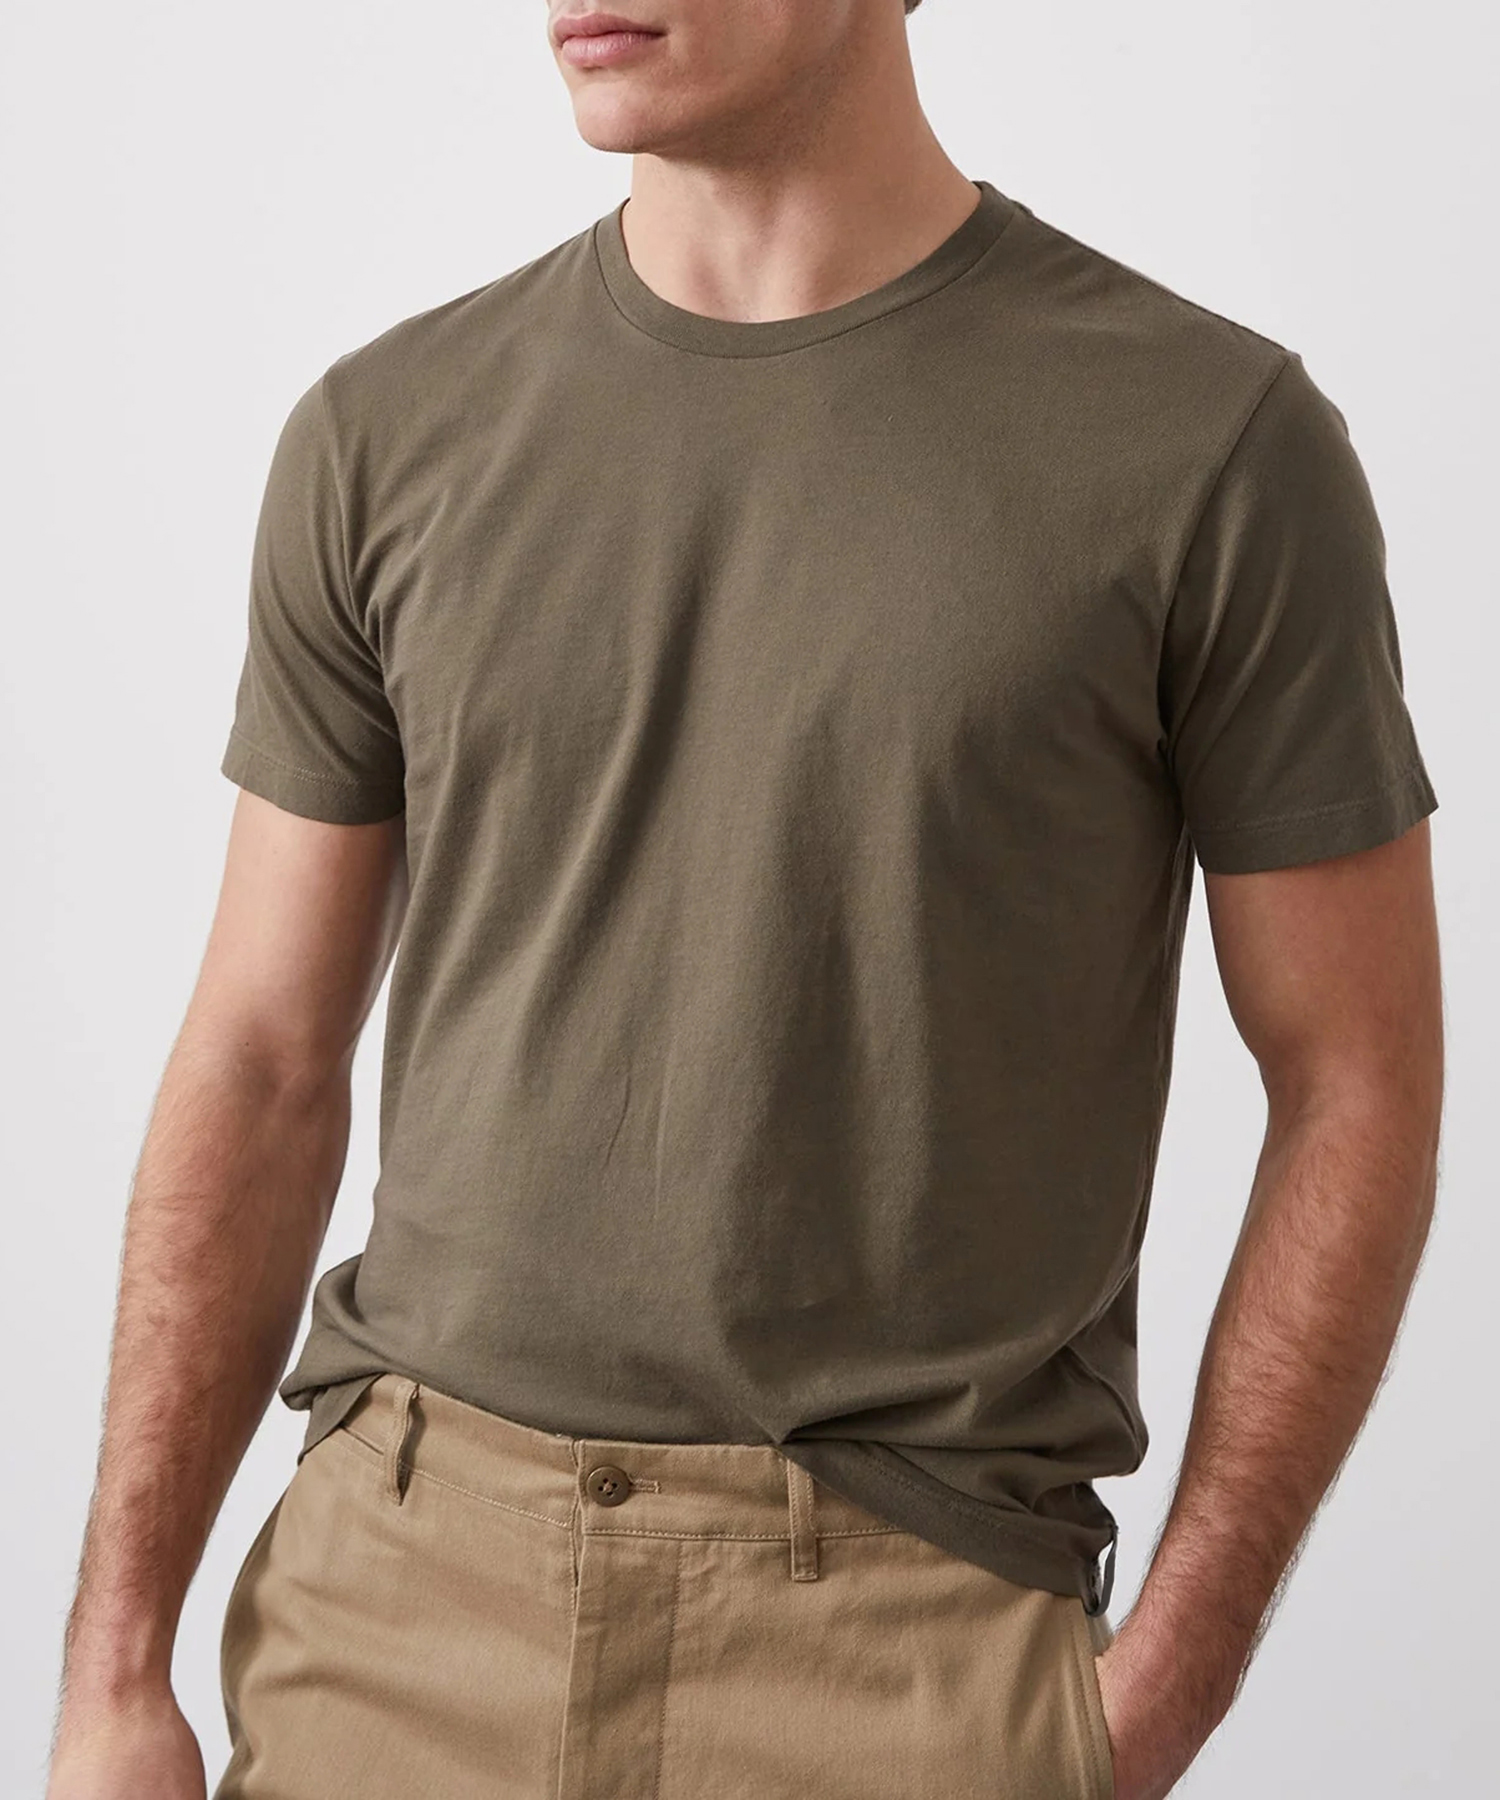 PREMIUM JERSEY T-SHIRT IN IN OLIVE